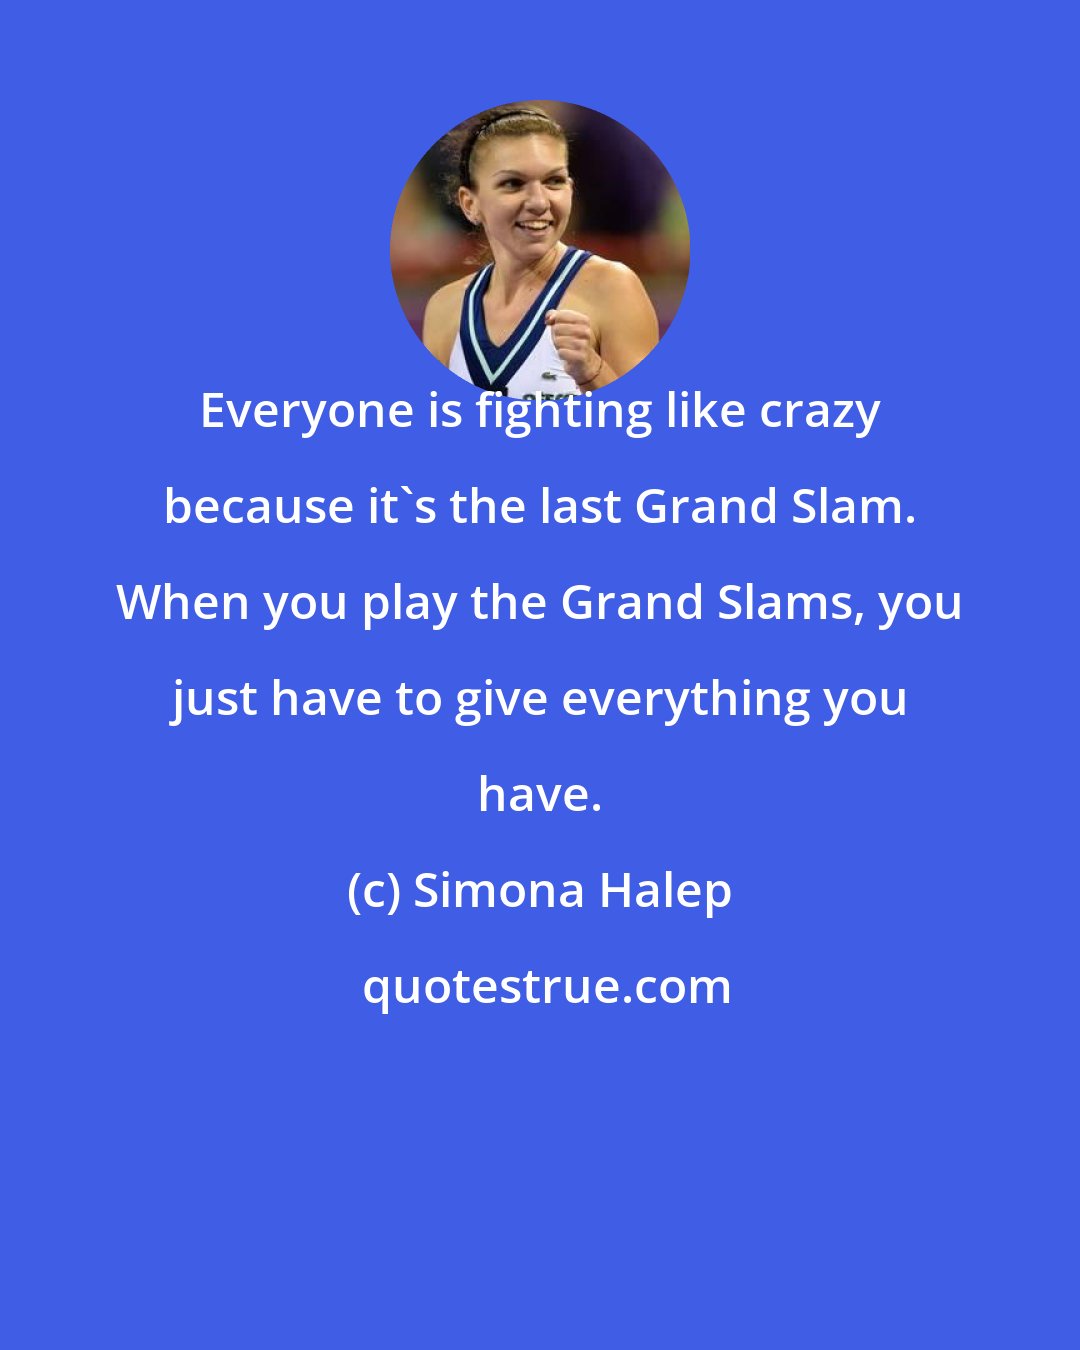 Simona Halep: Everyone is fighting like crazy because it's the last Grand Slam. When you play the Grand Slams, you just have to give everything you have.